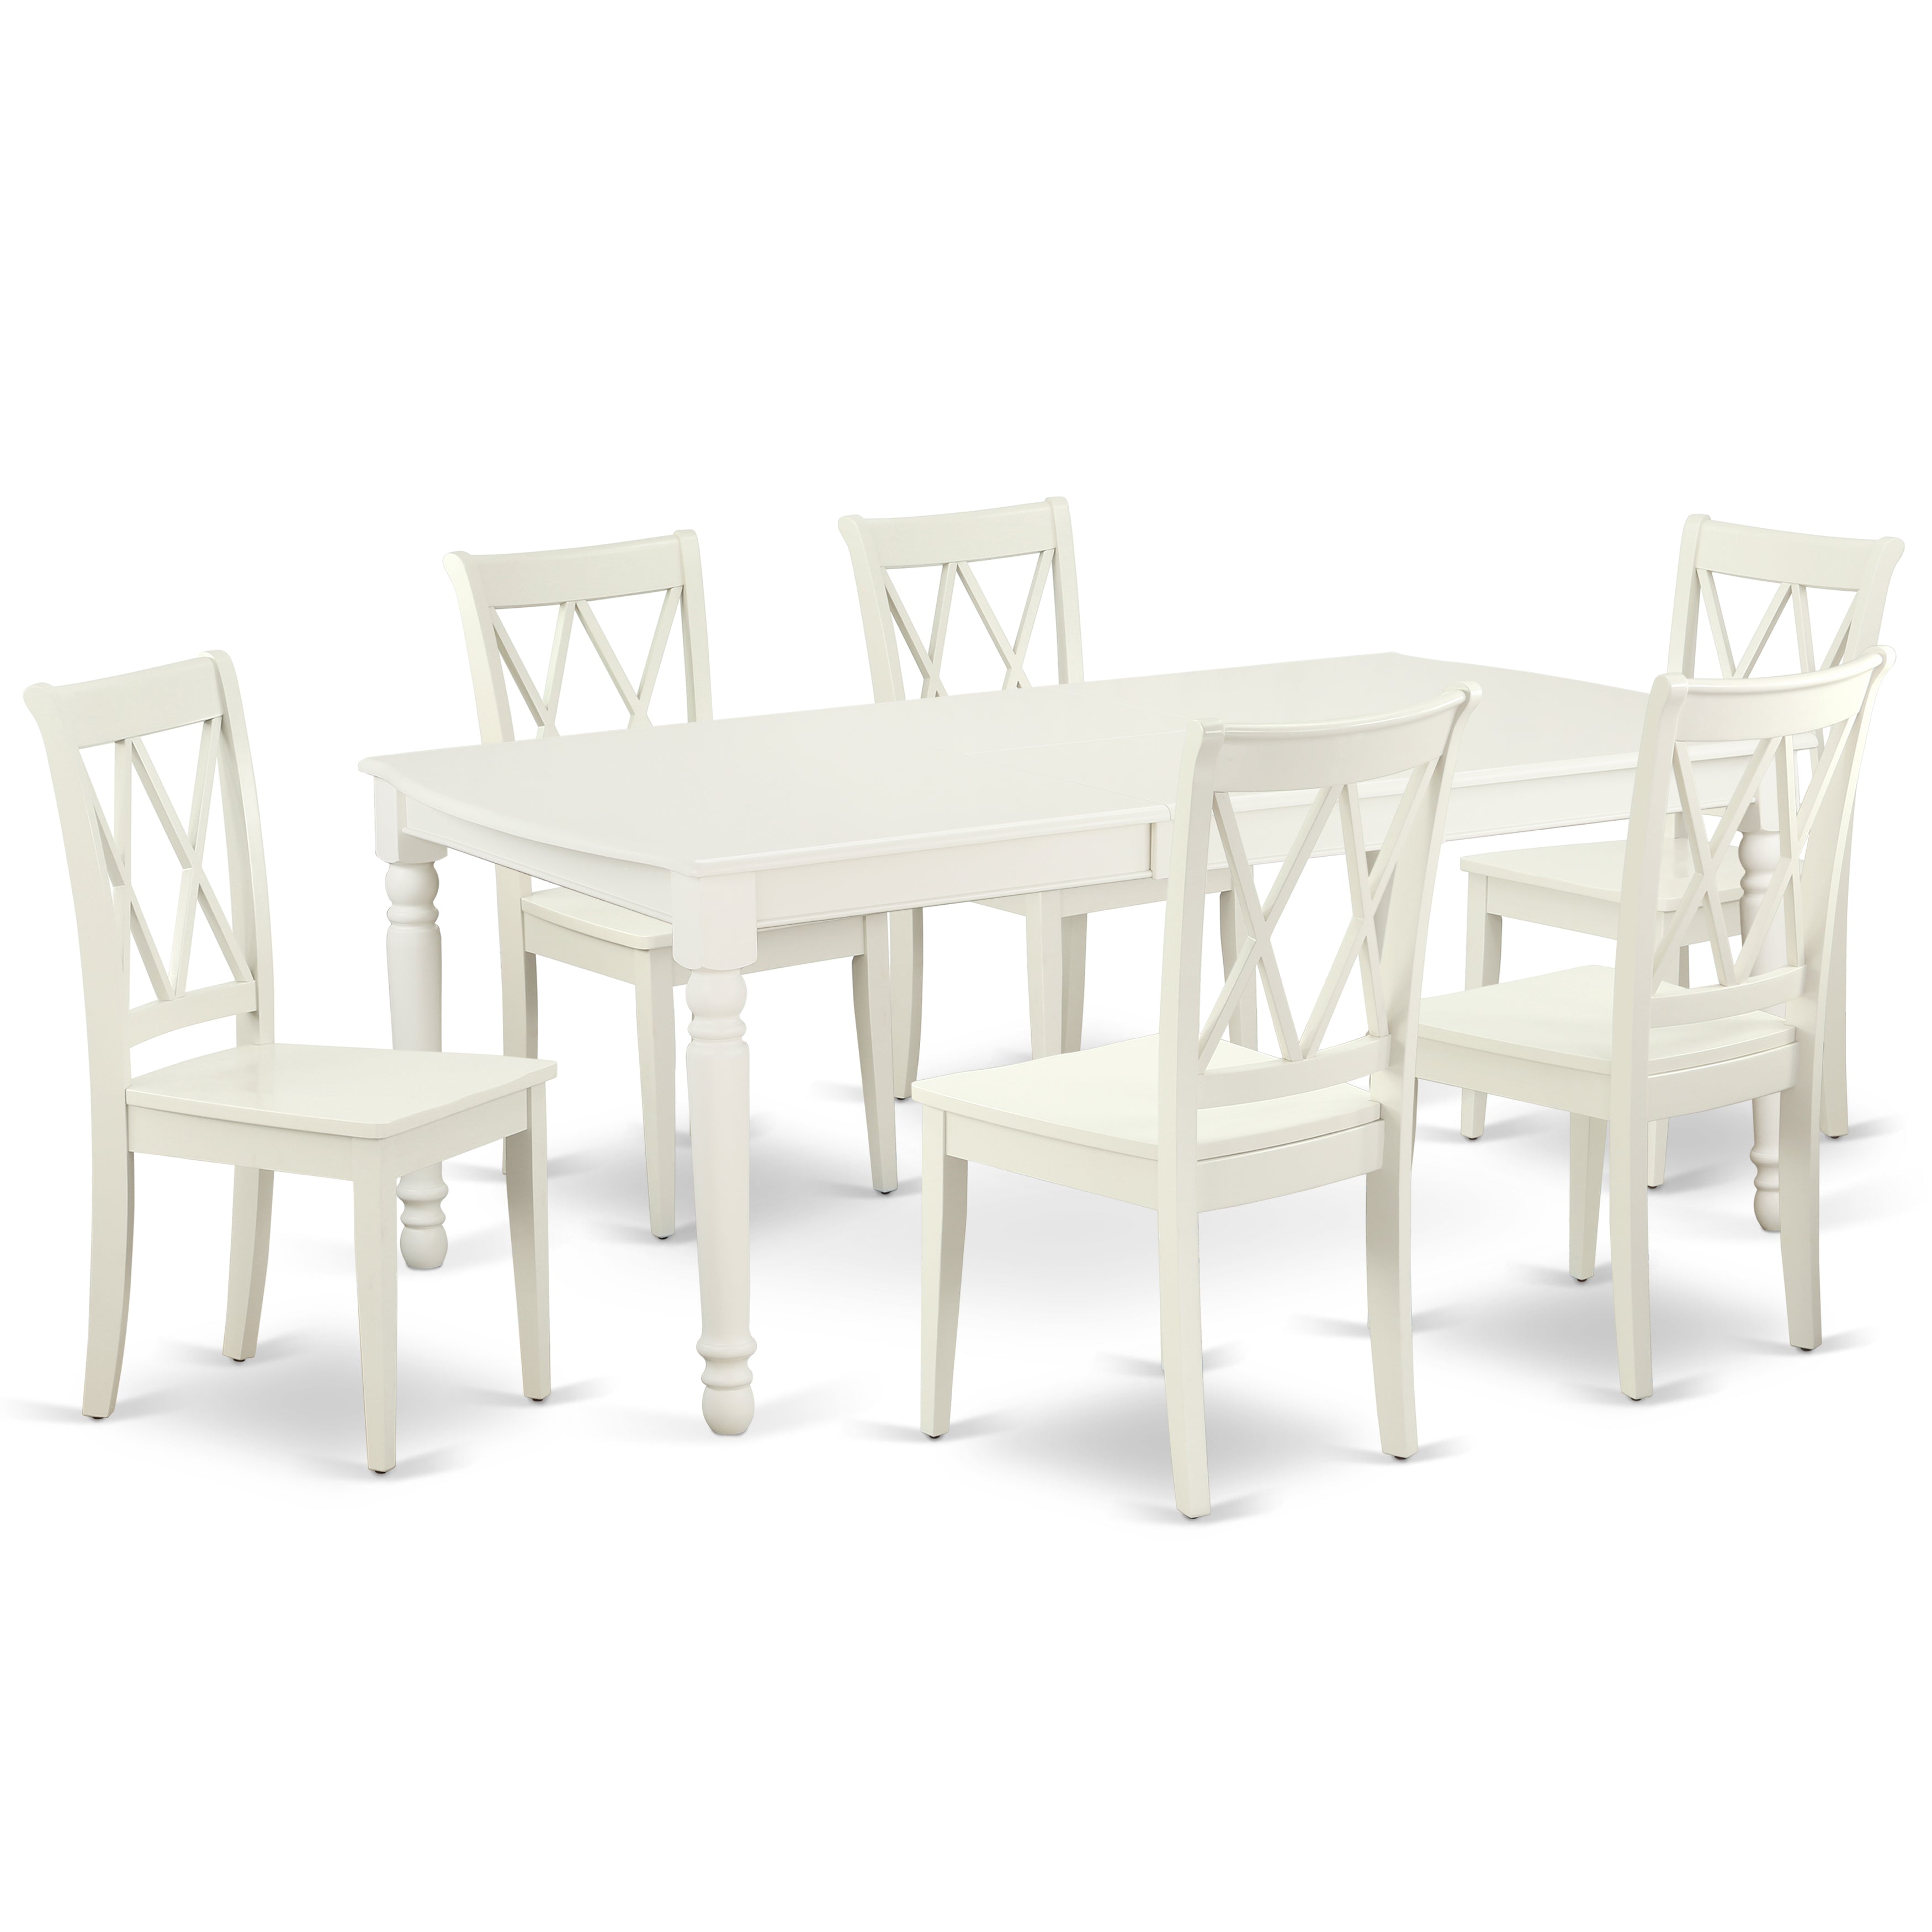 DOCL7-LWH-W 7PC Rectangular 60/78 inch Table with 18 In Leaf and 6 Double X back Chairs